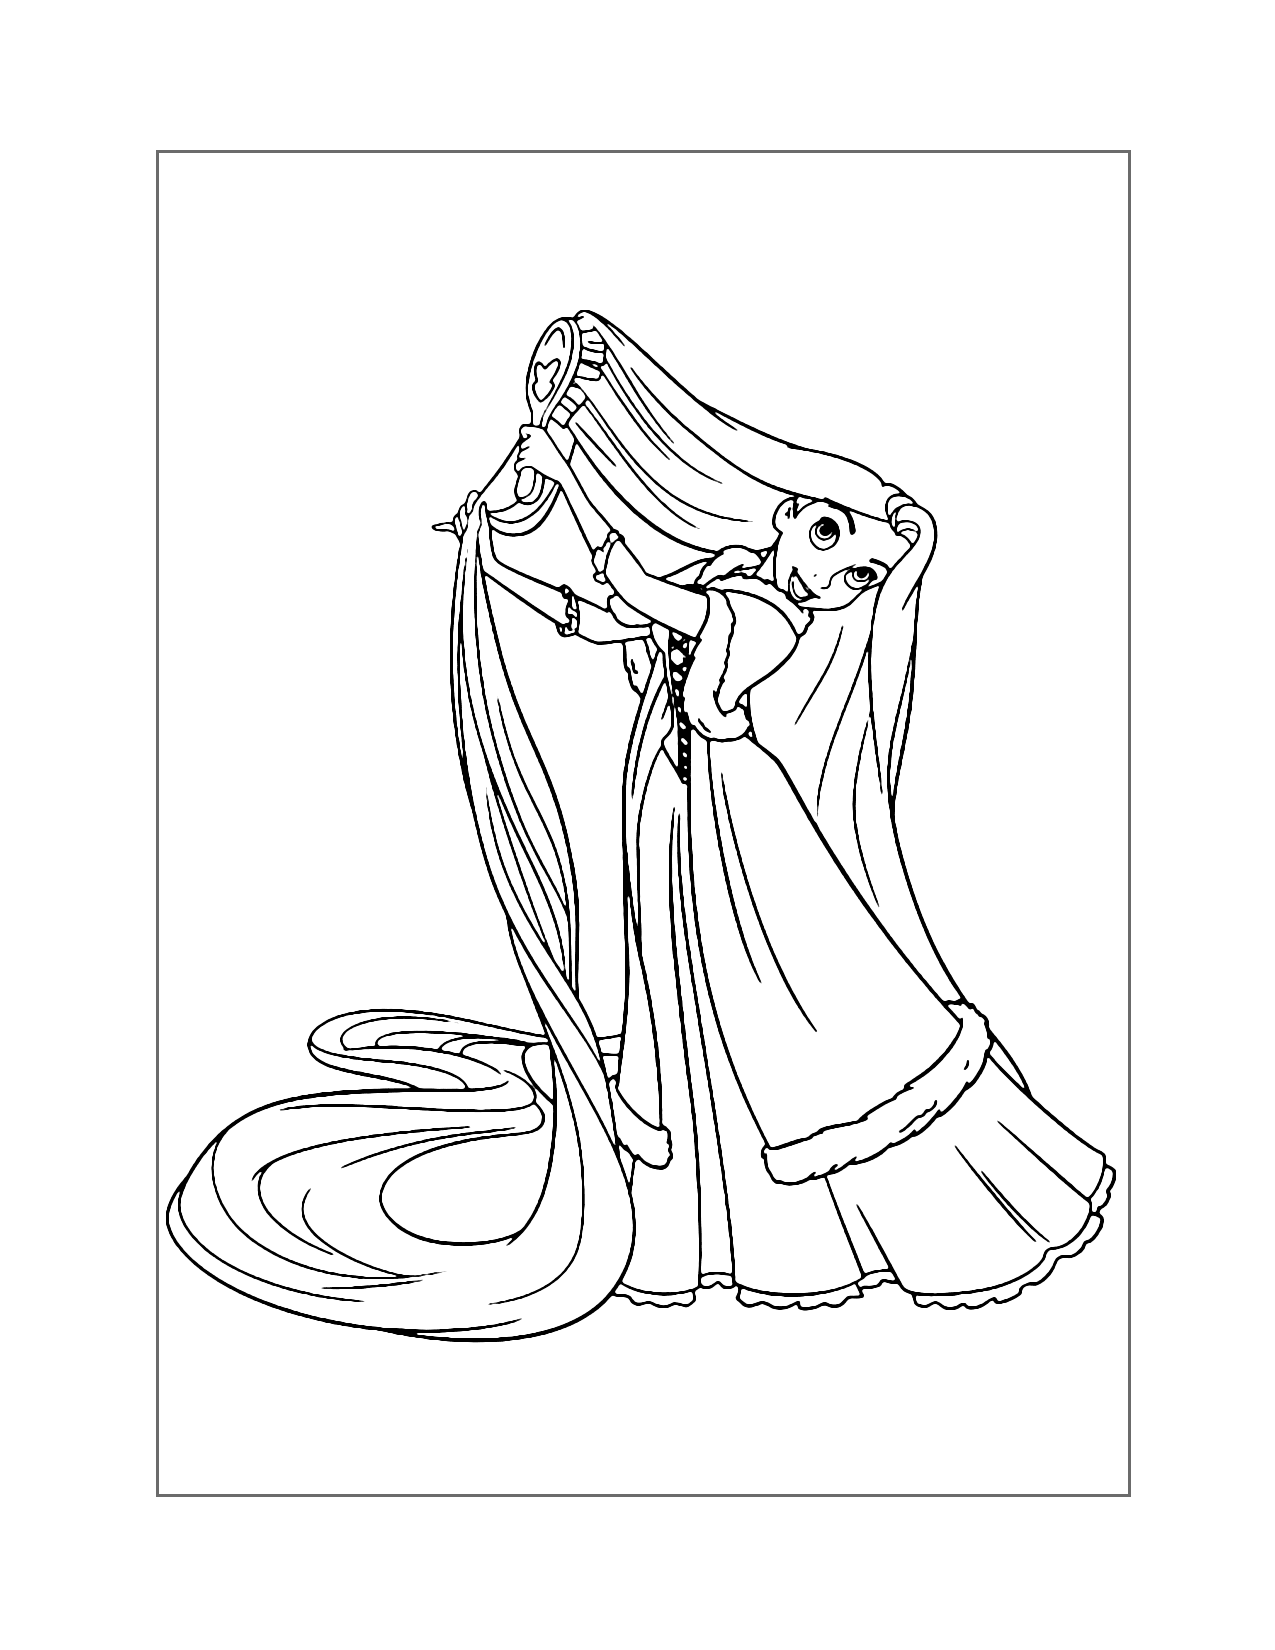 Rapunzel Brushing Her Hair Coloring Page